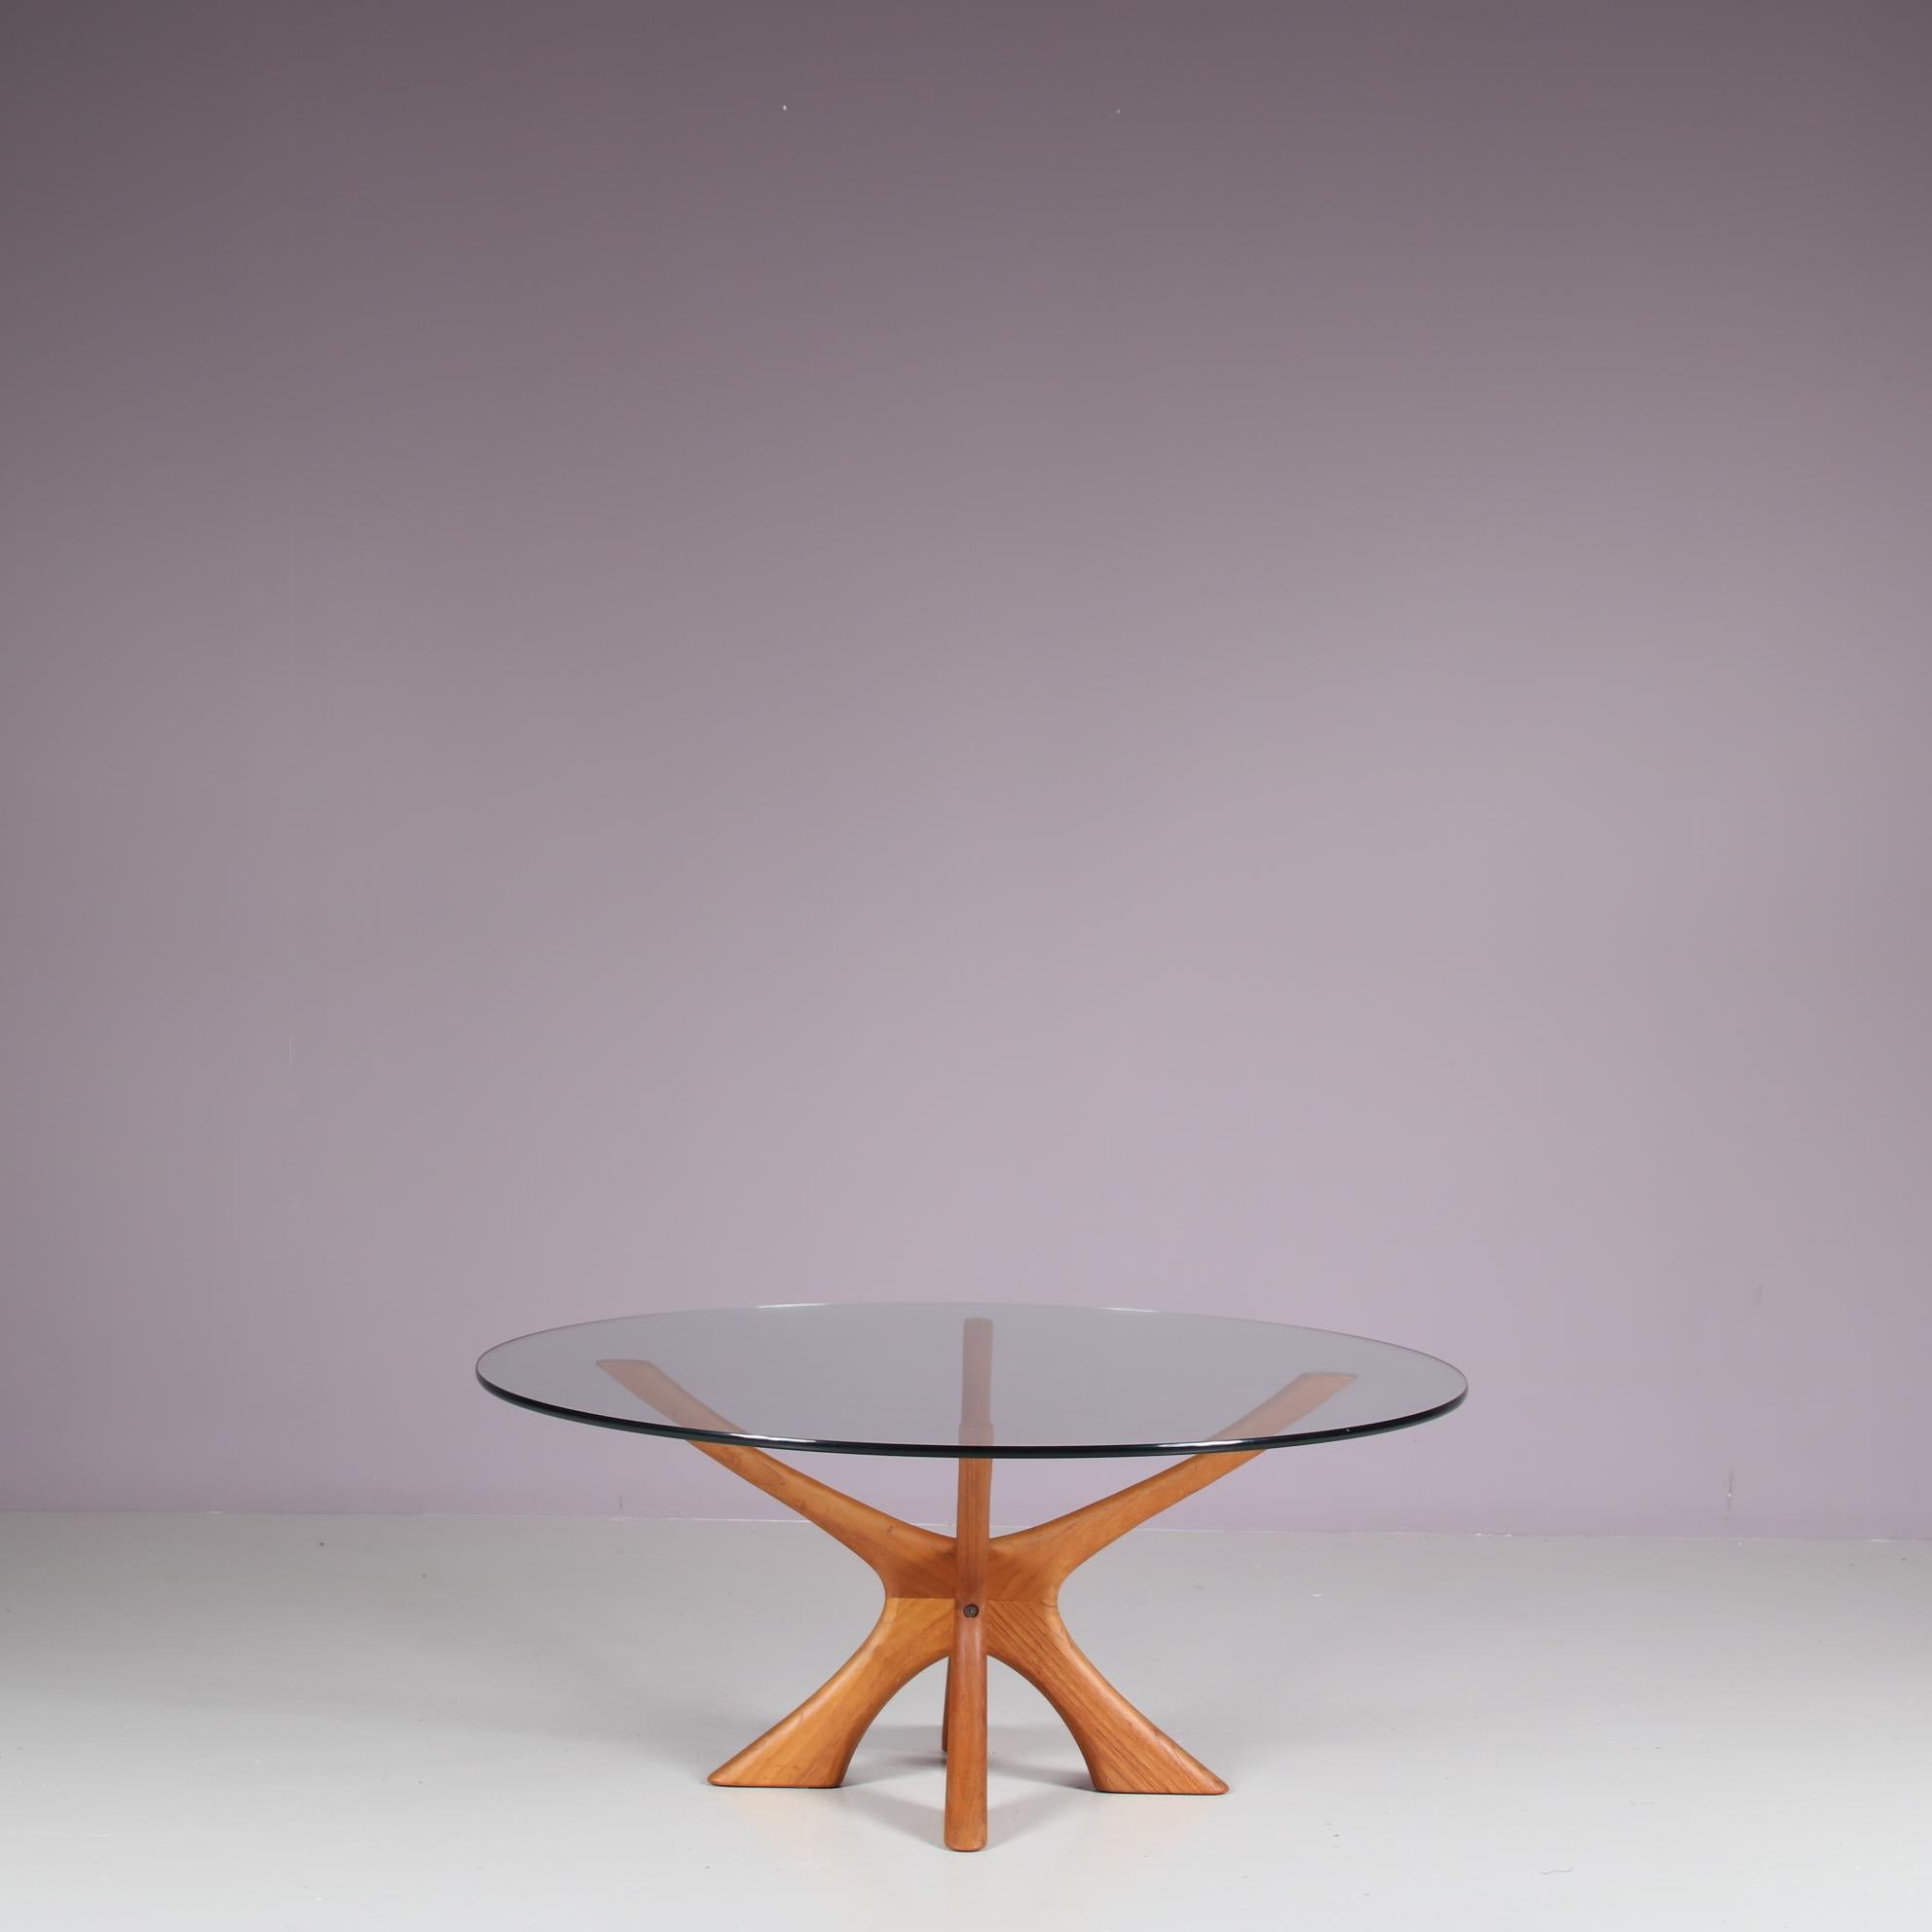 20th Century “T118” Coffee Table by Illum Wikkelso for Niels Eilersen, Denmark, 1960 For Sale